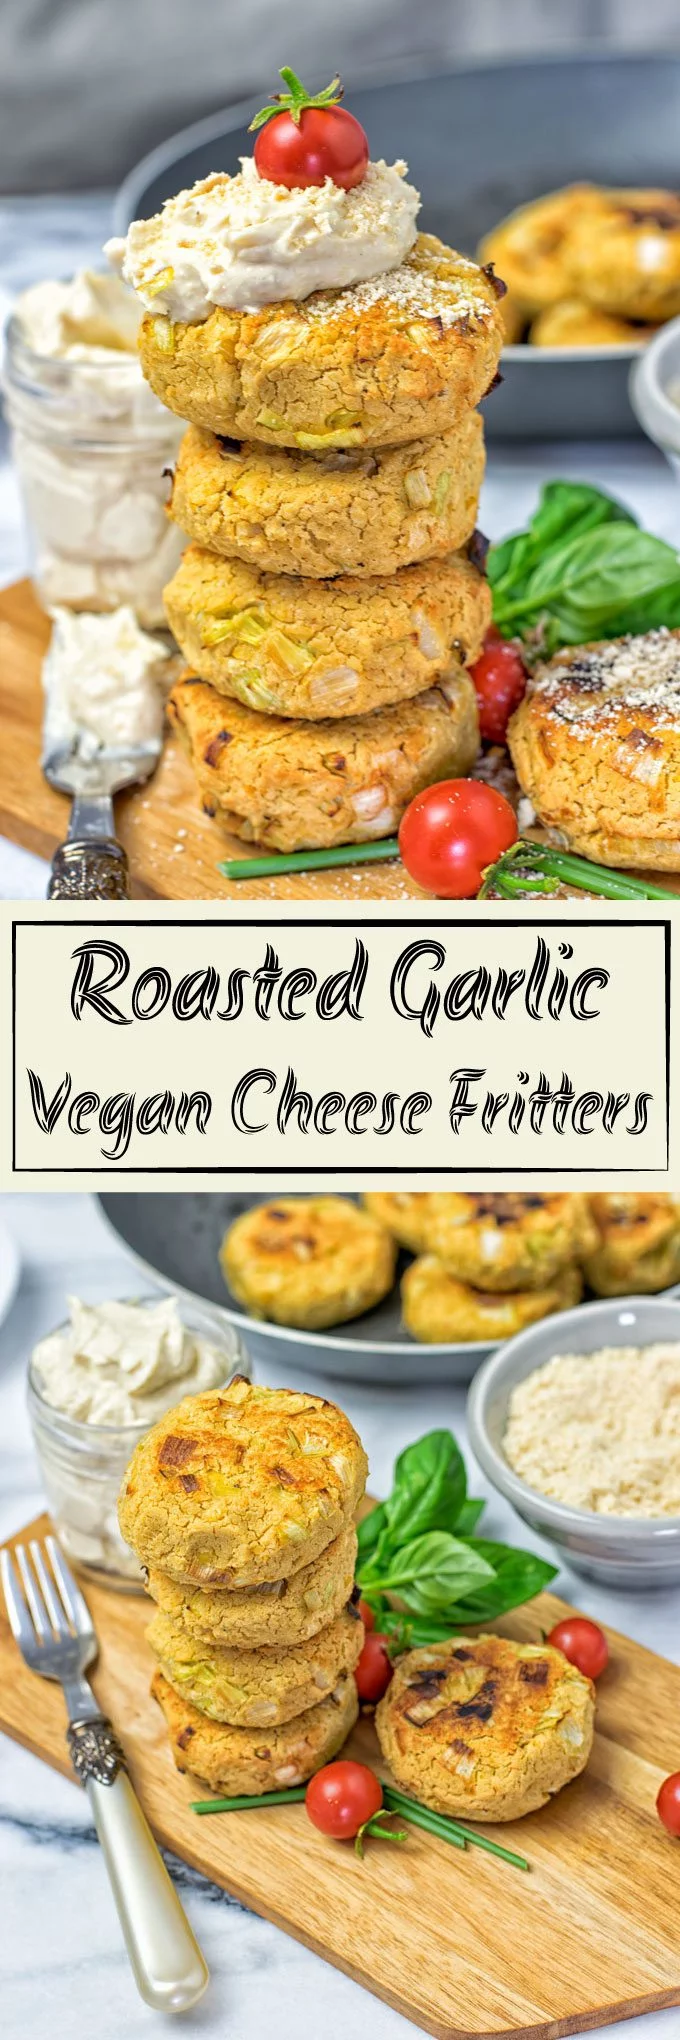 Collage of two pictures of Roasted Garlic Vegan Cheese Fritters with recipe title text.